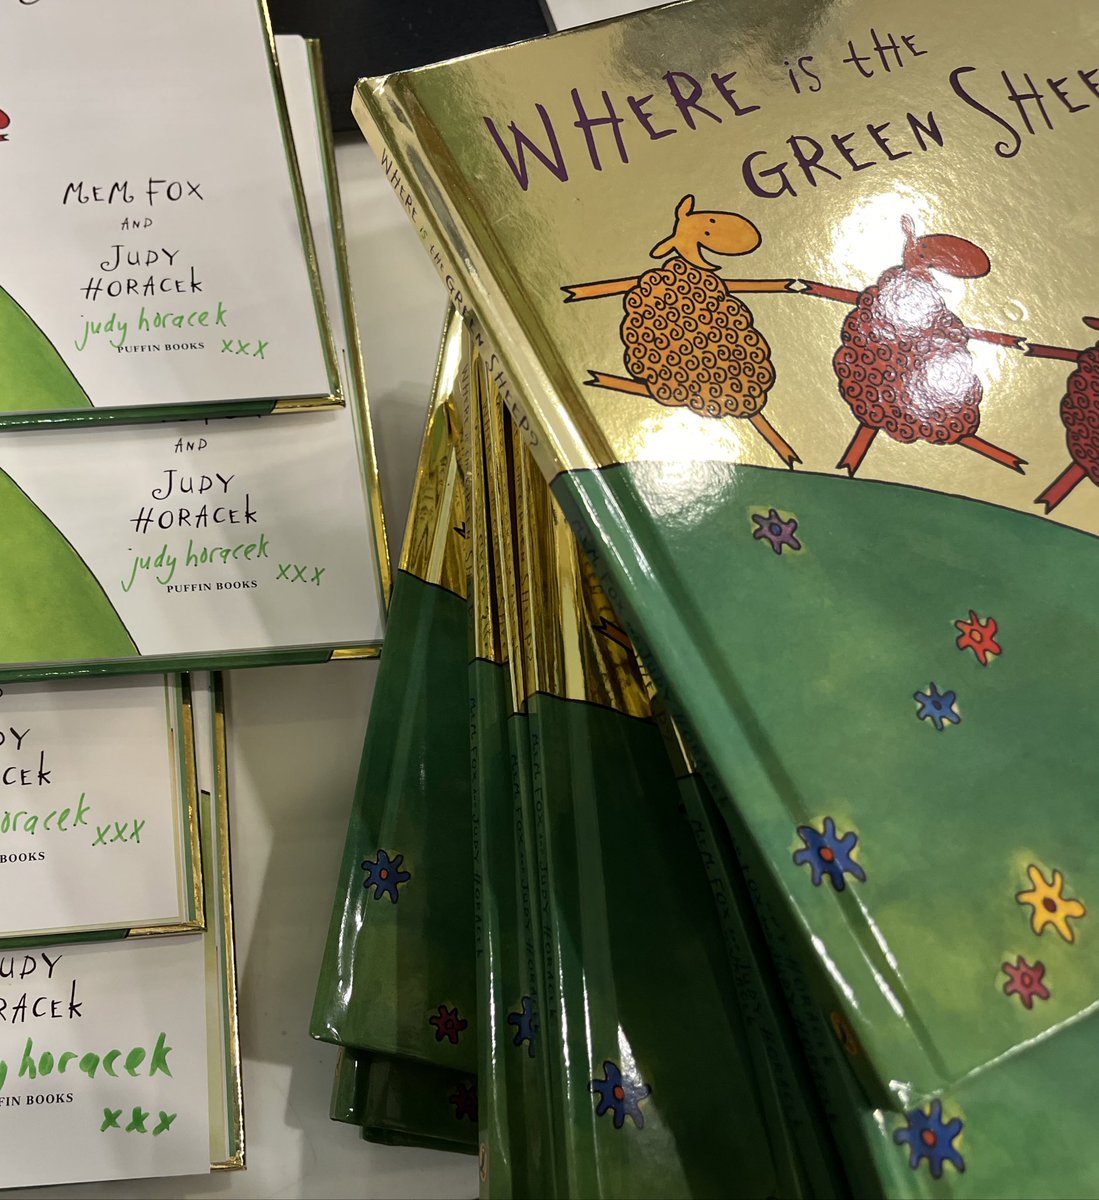 Jyst sogned a whole stack of the golden 20th Anniversary edition of ‘Where is the Green sheep?’  20 years old! But where are the signed books? At @ReadingsBooks - their kids’ shop in Carlton! 💚💚💚